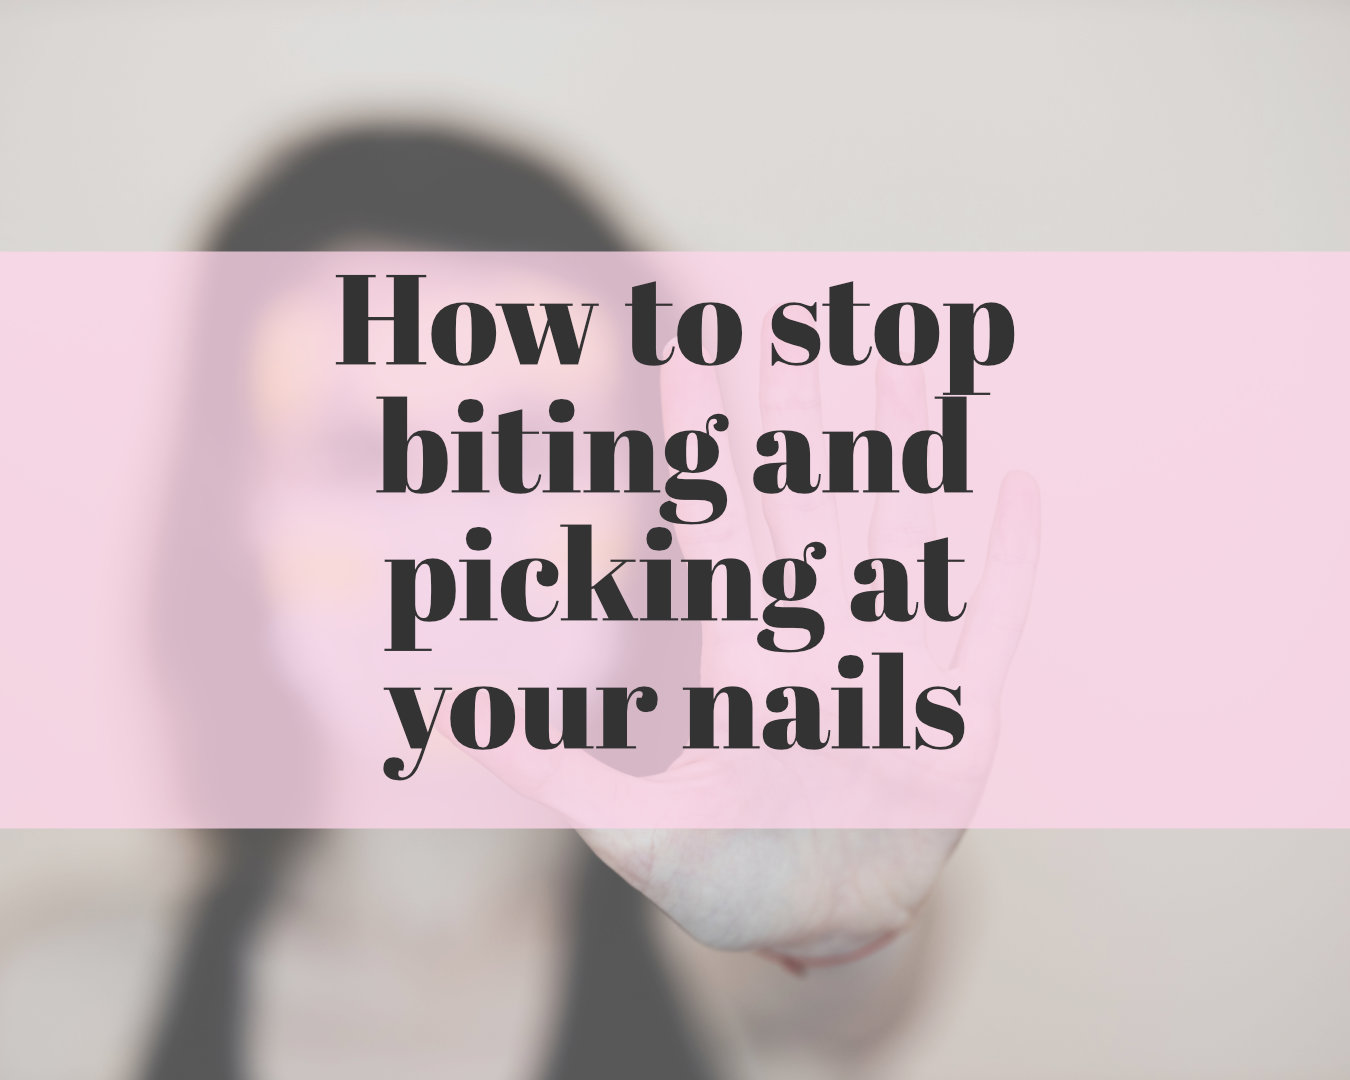 How to stop biting and picking at your nails